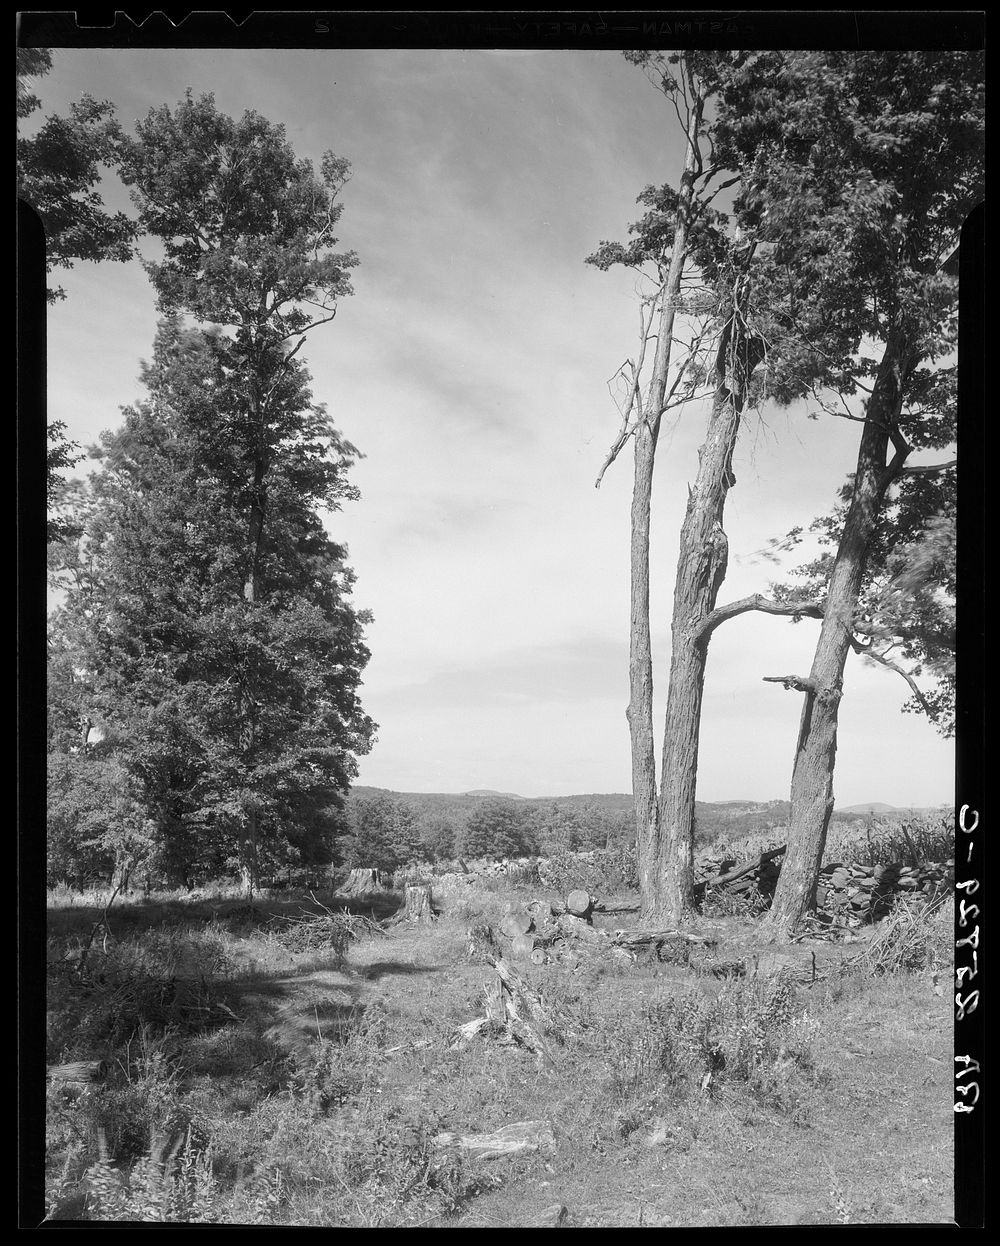 Cut-over land. Chittenden County, Vermont. Sourced from the Library of Congress.